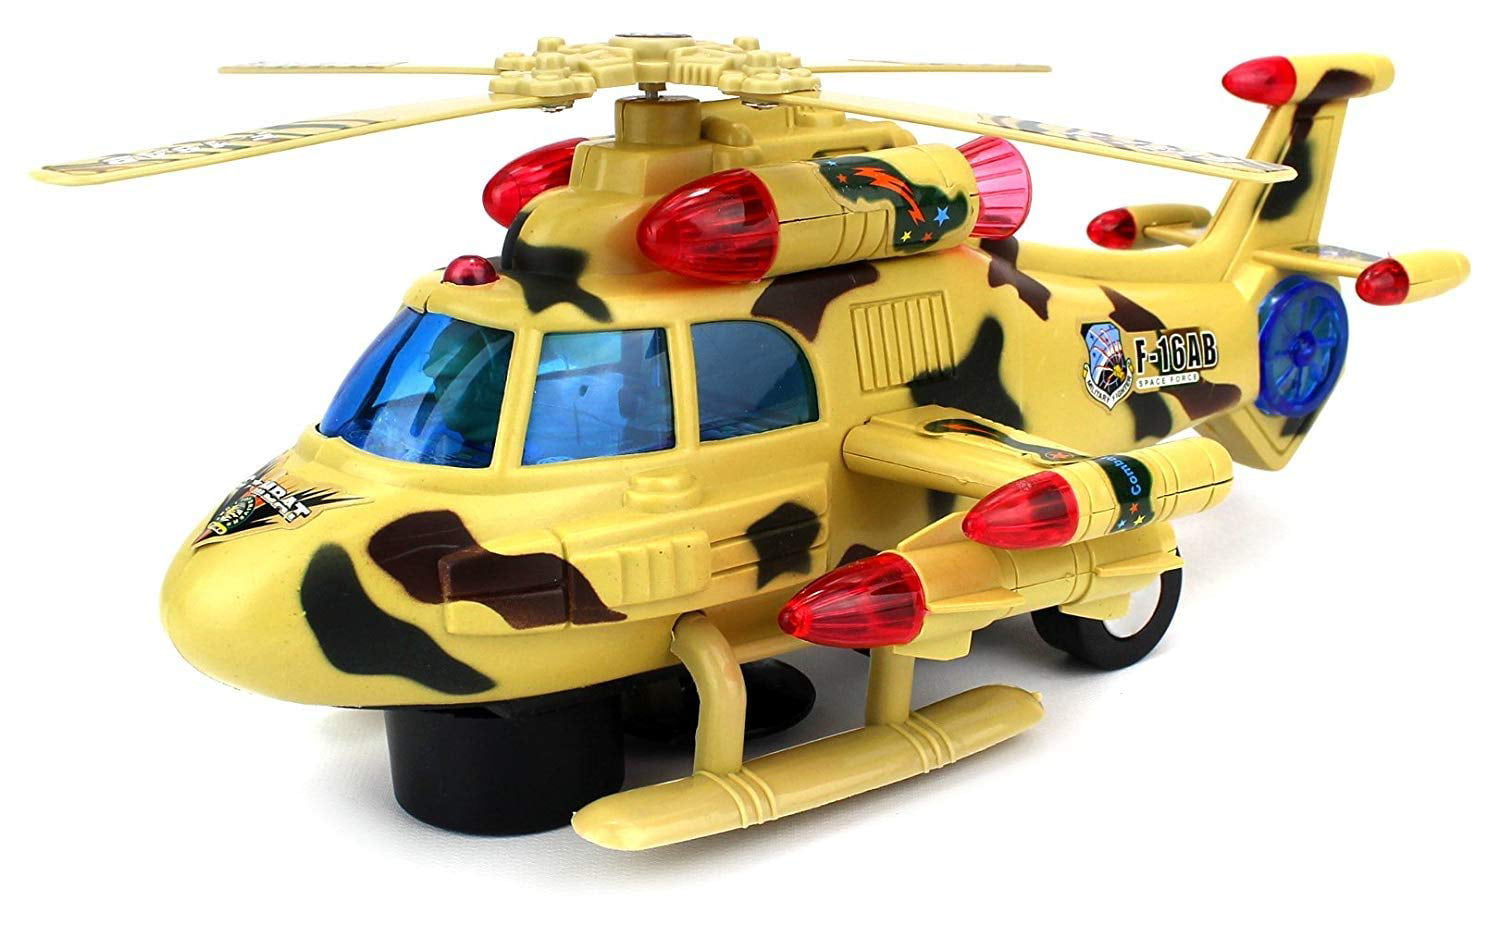 Paradise Treasures Kids Bump and Go Military Toy Helicopter w/ Awesome Spinning Propellers Flashing Lights Military SoBumps Iunds into Something and Will Change Direction 